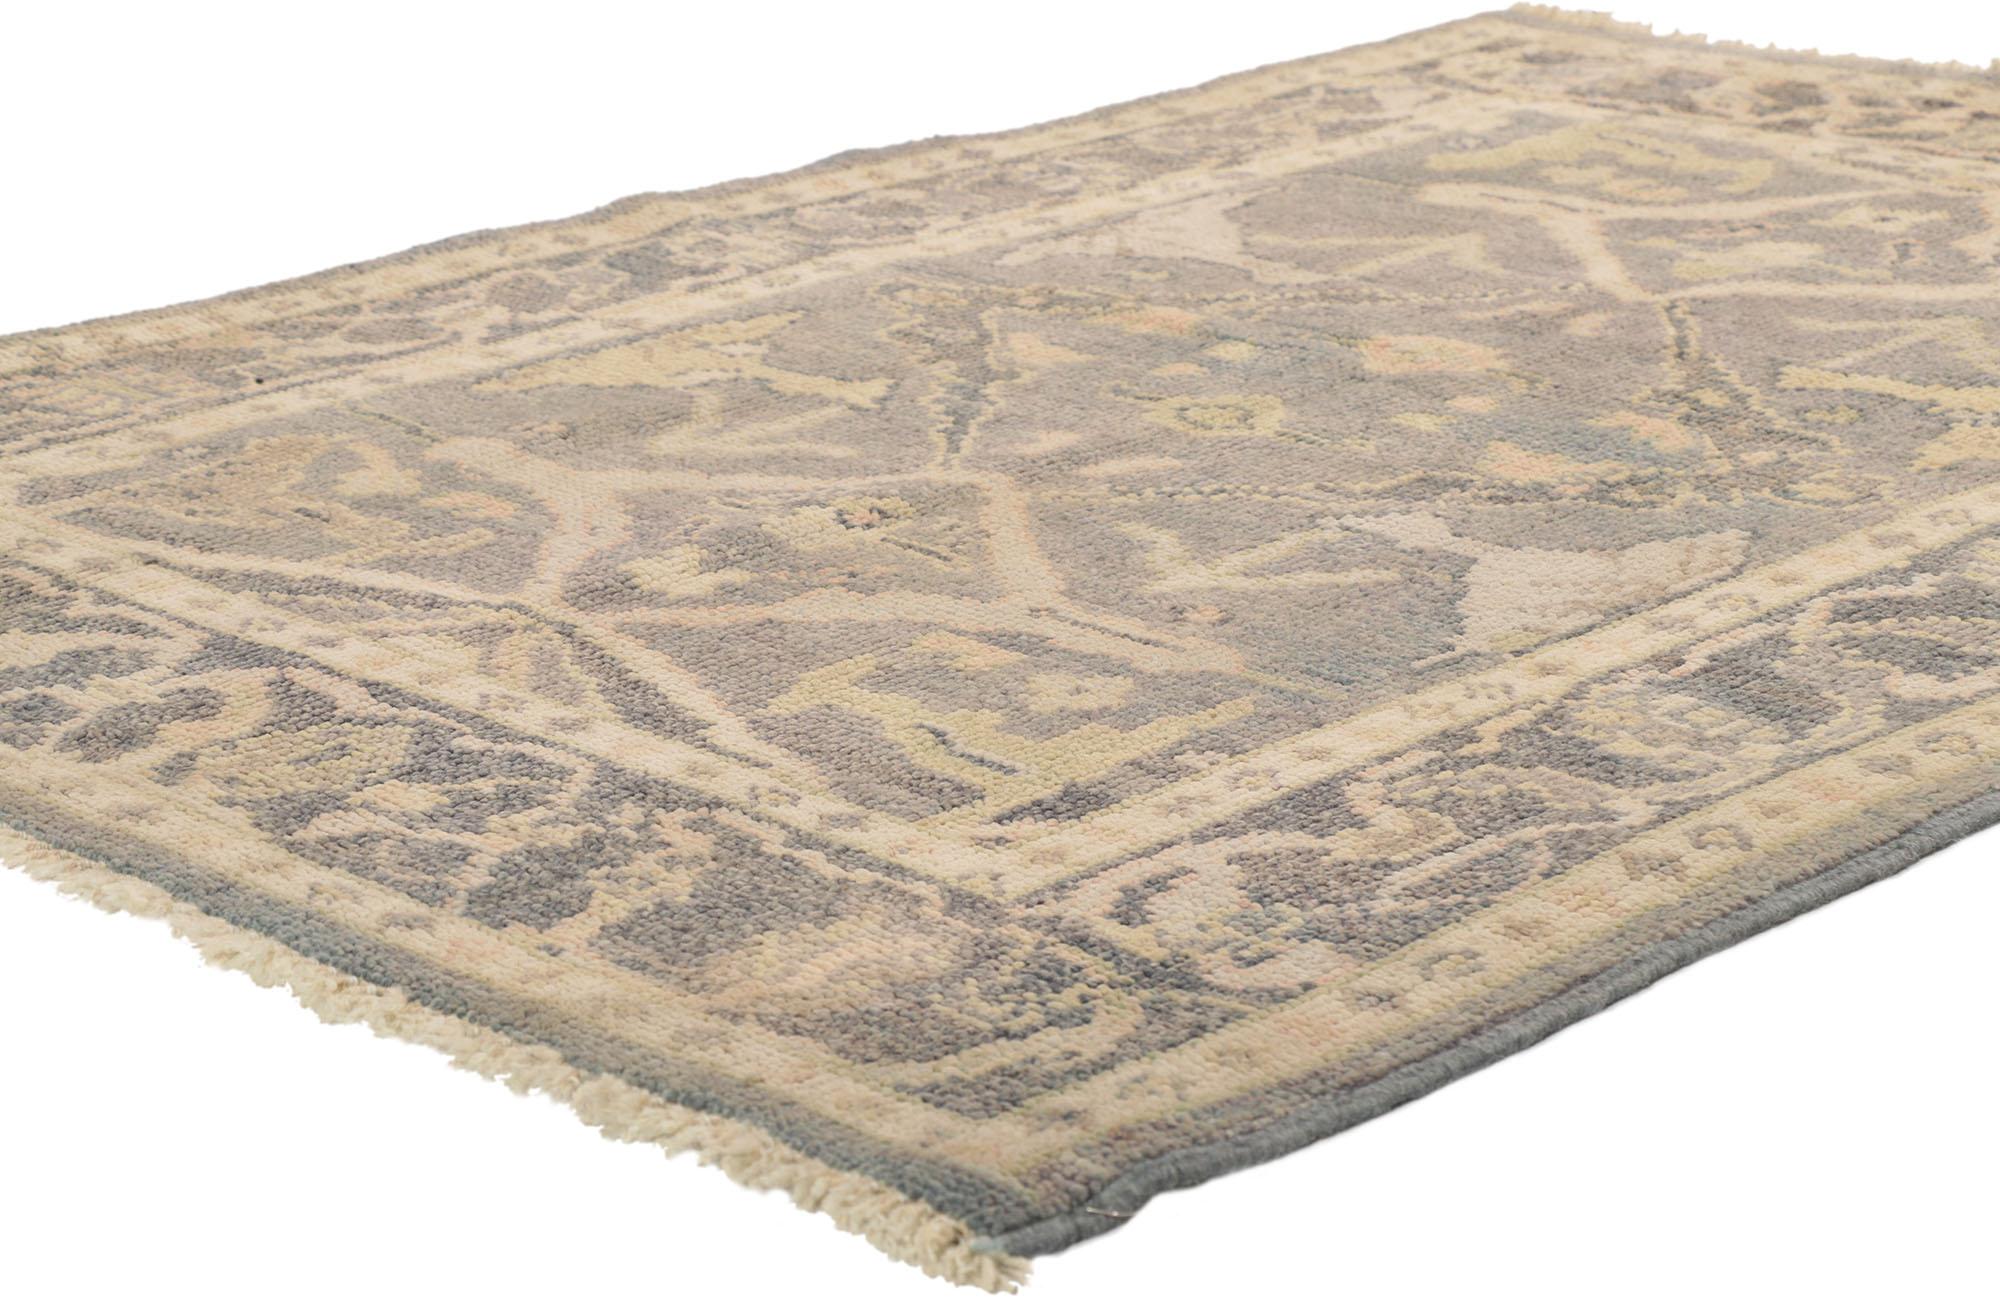 80687 New Contemporary Oushak rug with Modern Style 04'00 x 05'09. Polished and playful, this hand-knotted wool small Oushak rug beautifully embodies a modern style. The abrashed field features a botanical pattern composed of angular vinery and